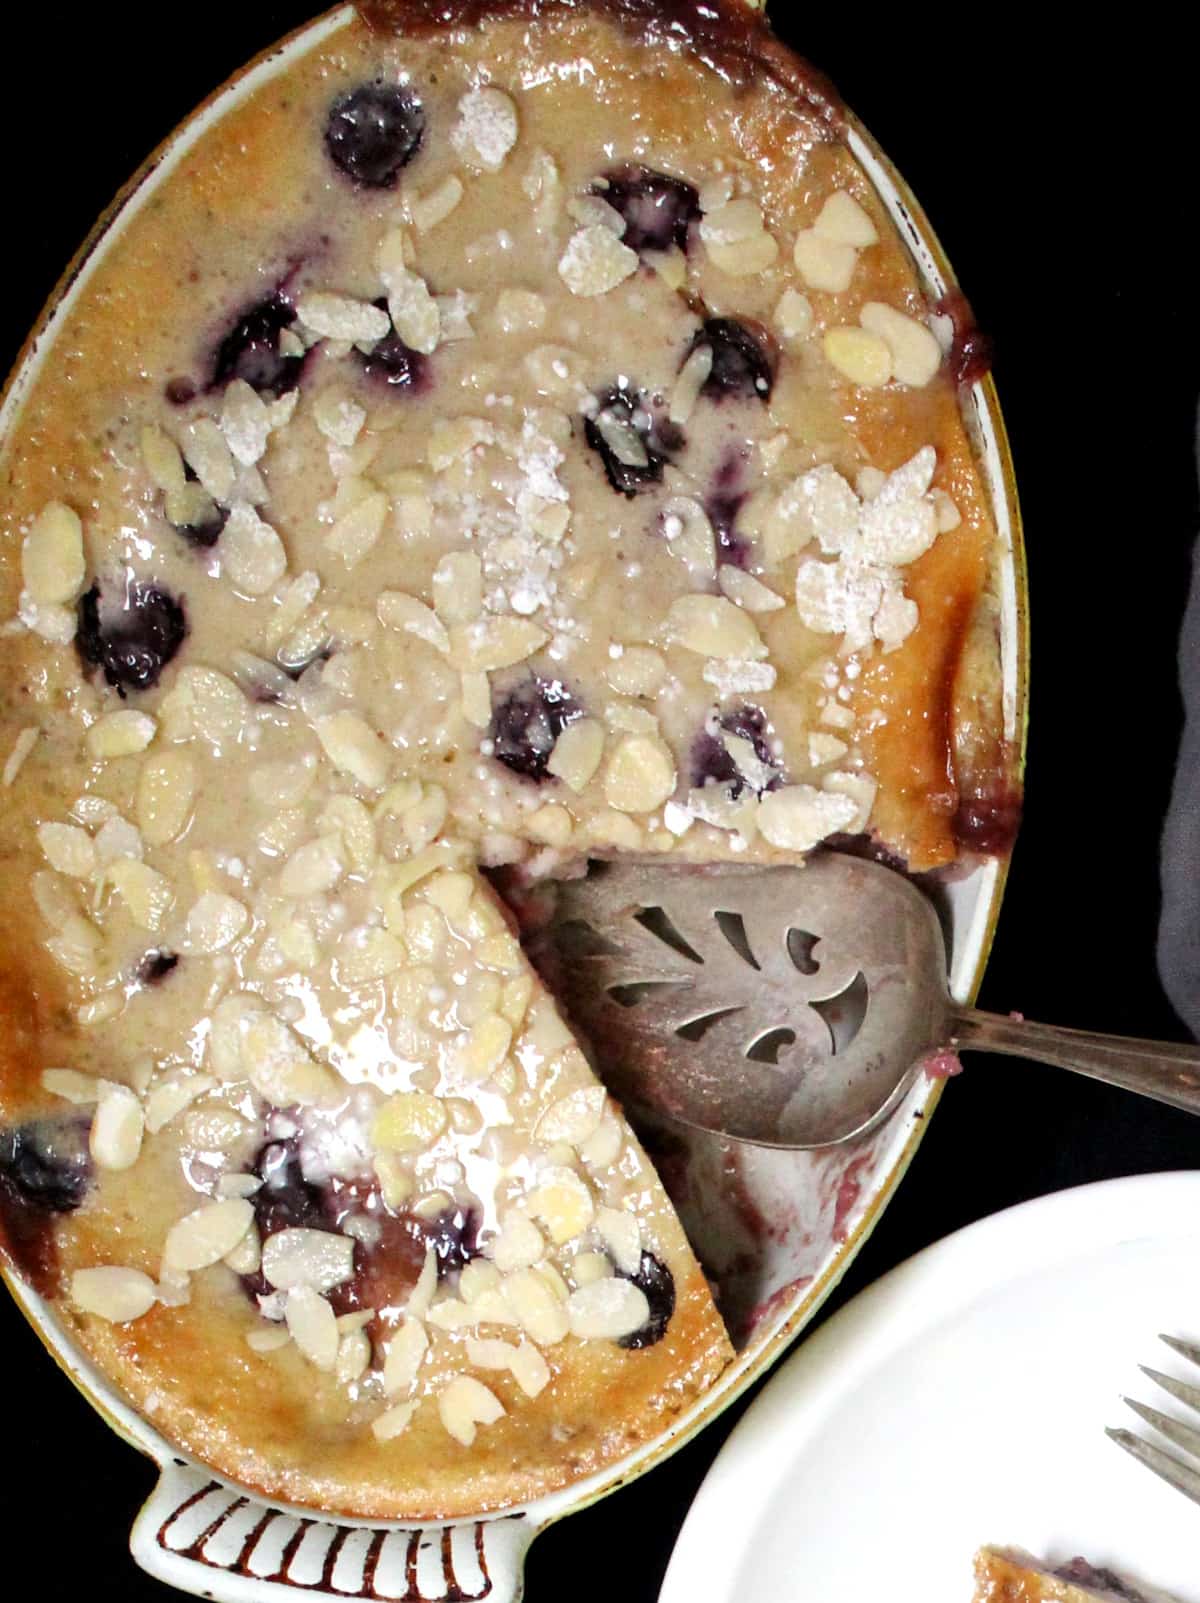 Vegan Cherry Clafoutis in an oval ceramic baking dish with a decorative pie server